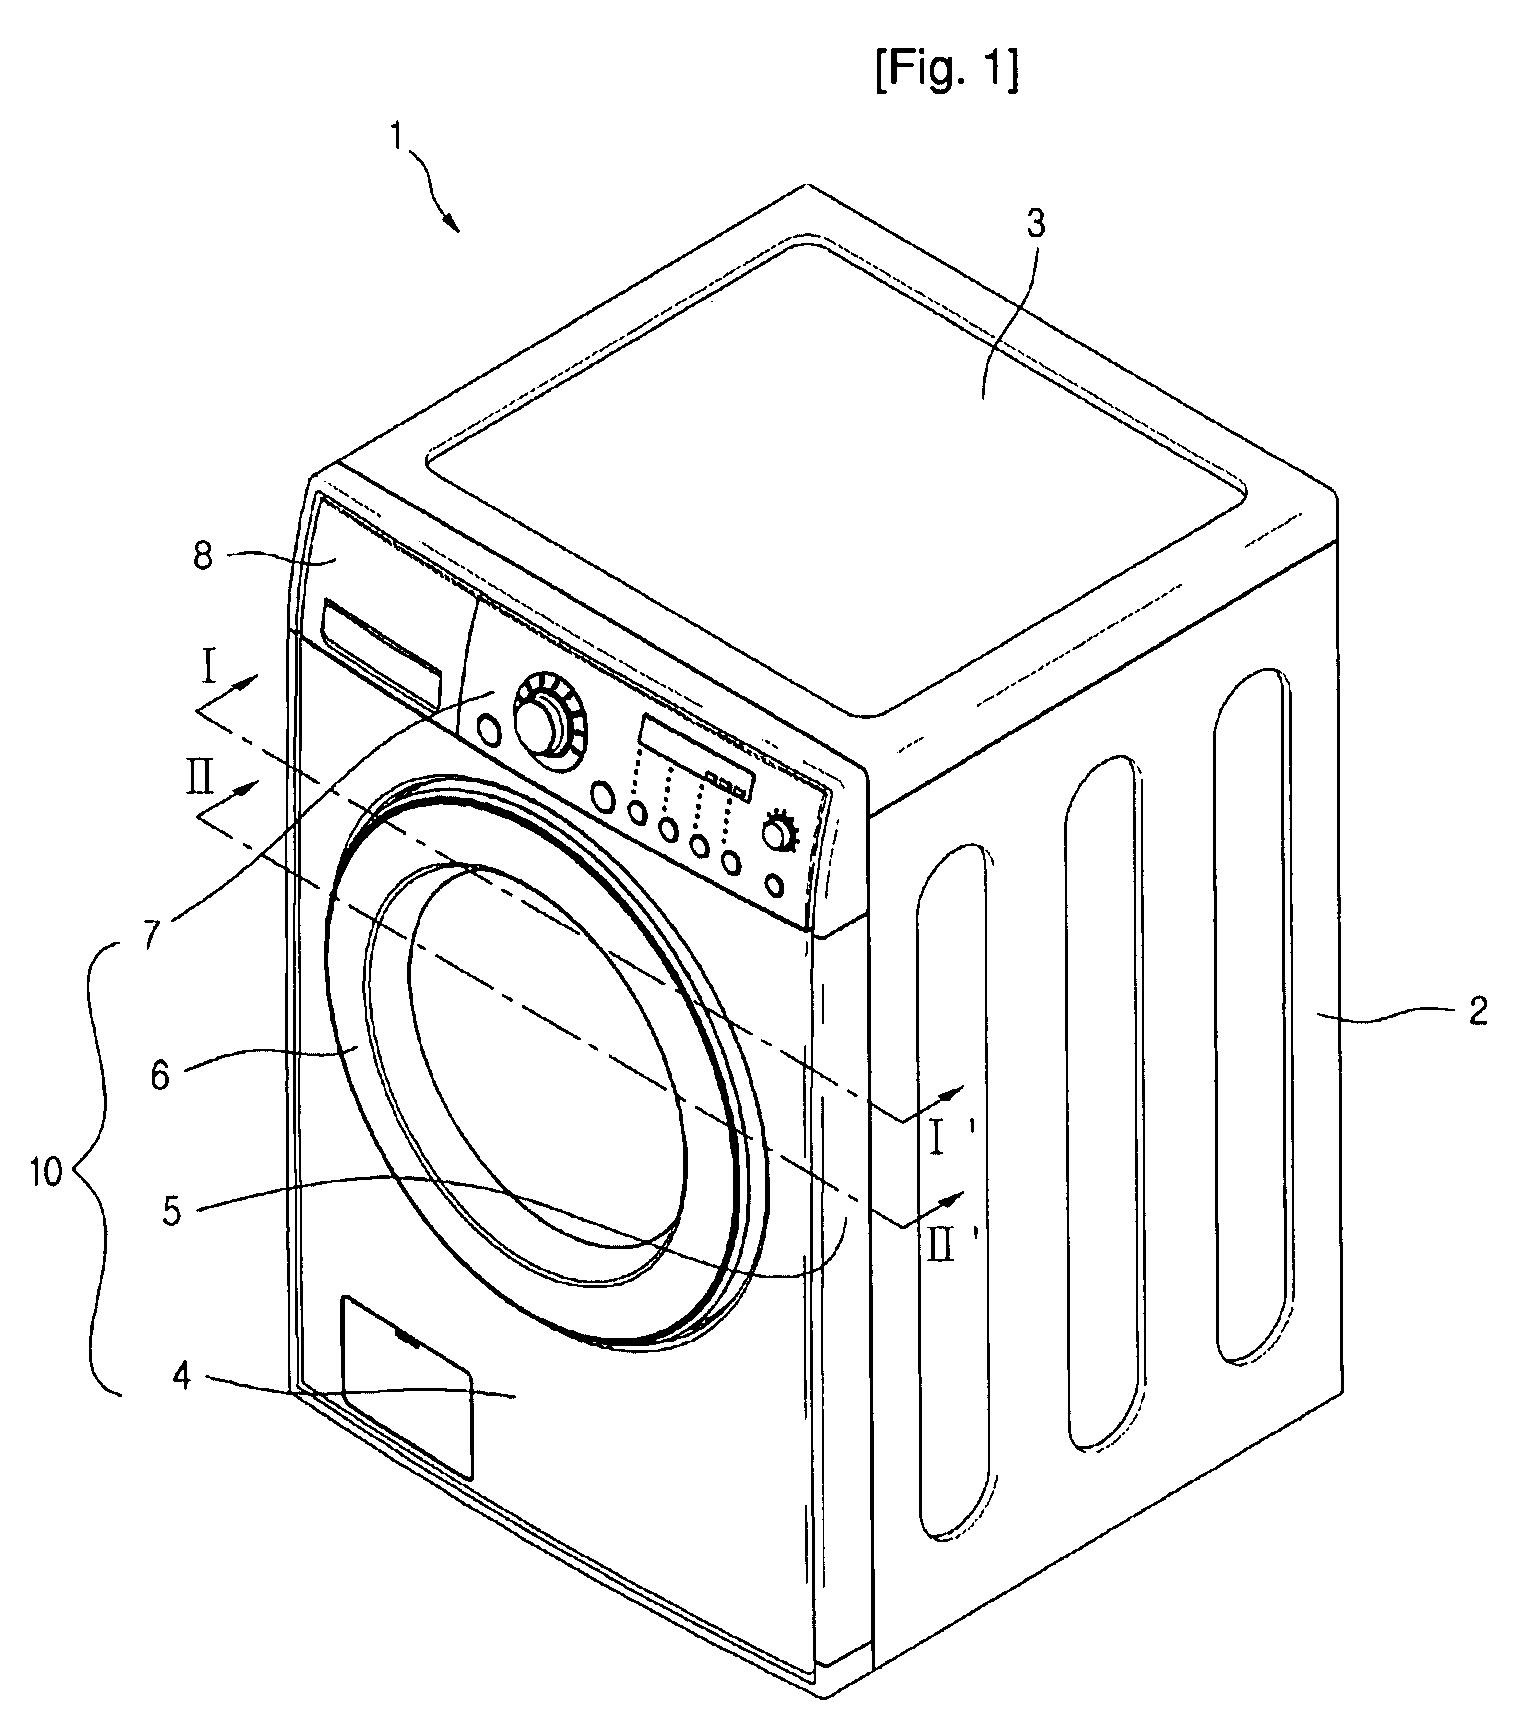 Cleaning Apparatus and Manufacturing and Assembly Methods for the Same